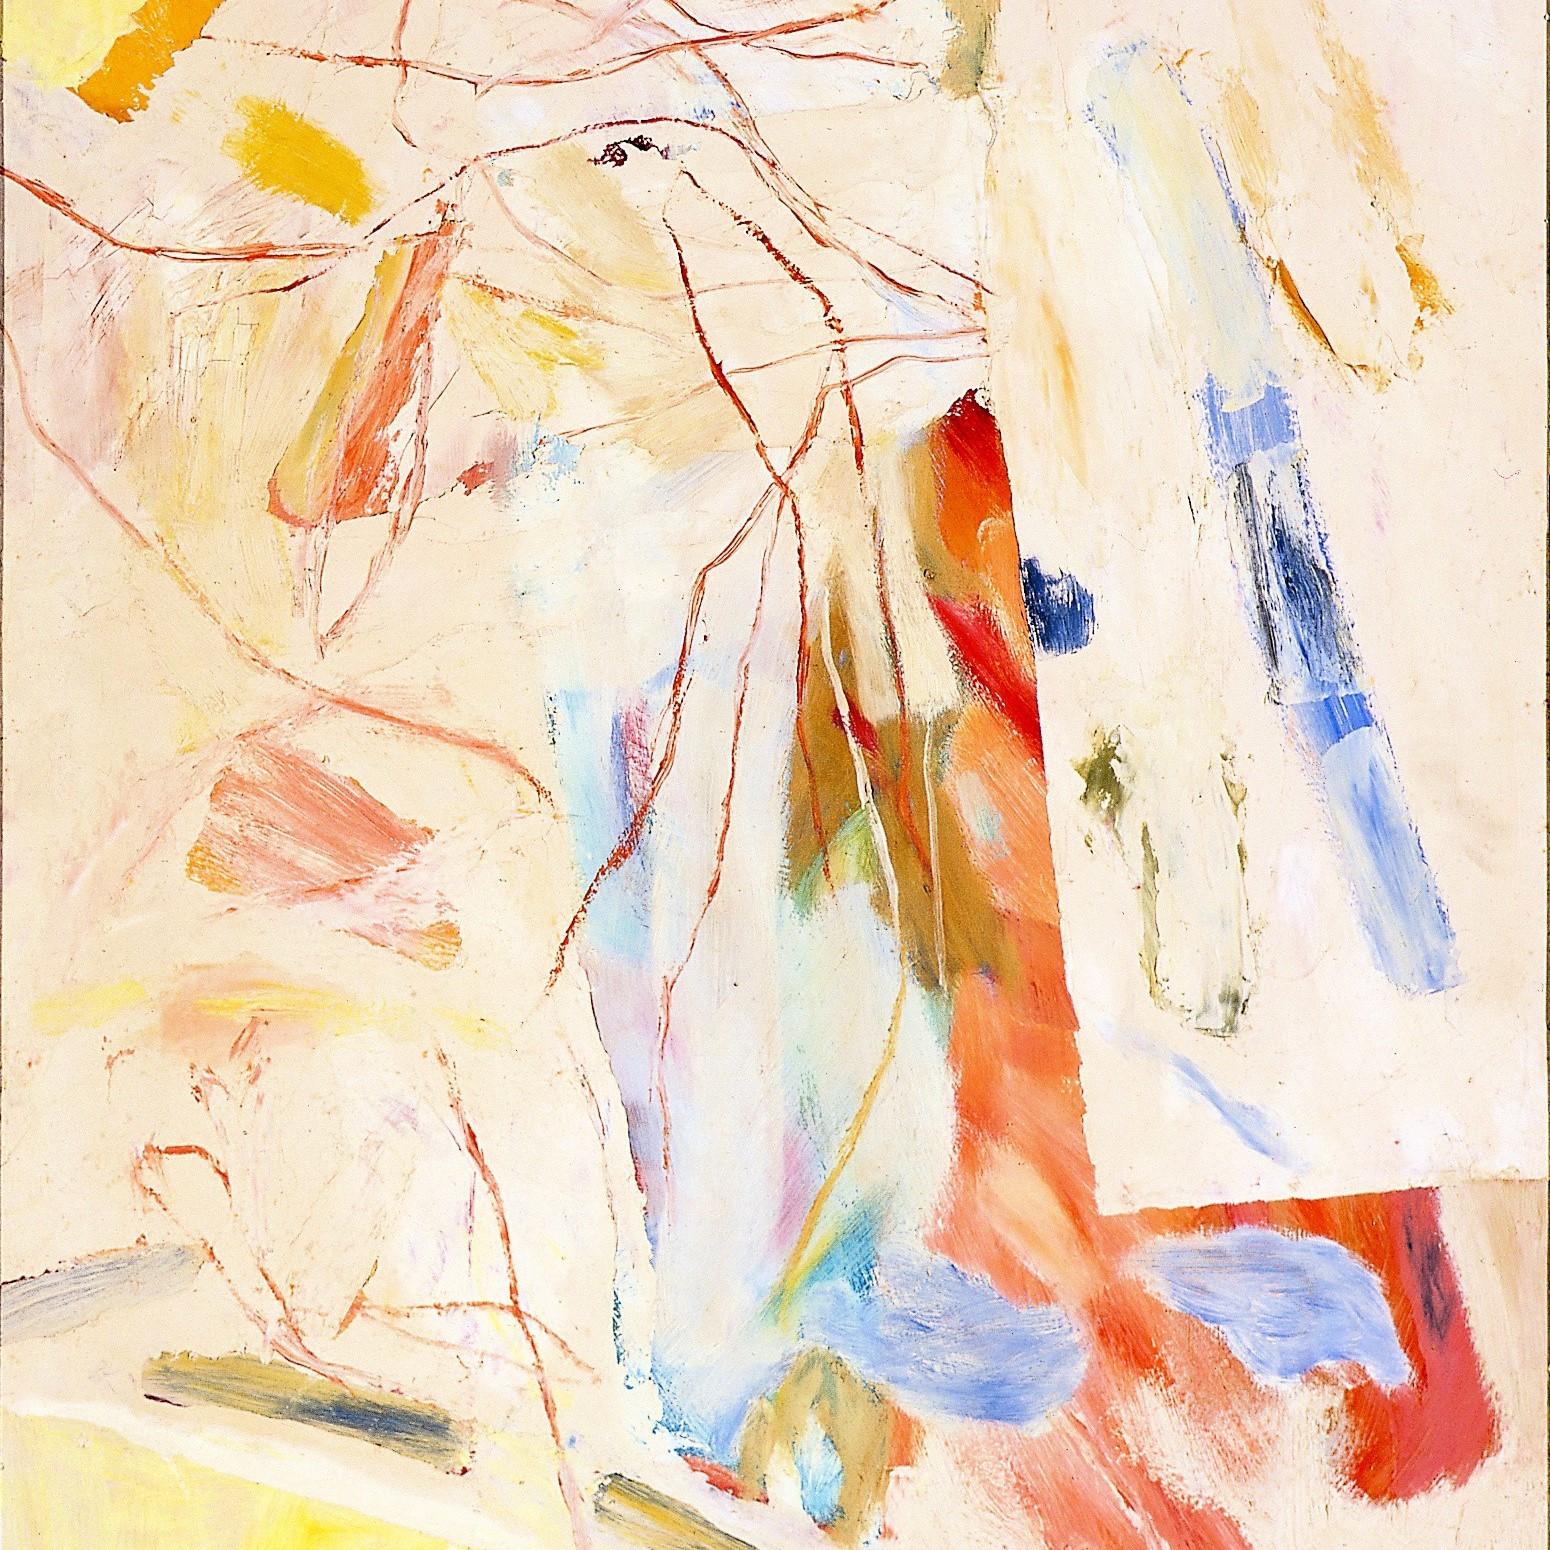 This painting is a perfect example of lyrical abstraction and a choice painting out of the best period of Vlerick's career.


Ineffable, 1962
Oil on Masonite board
91,5 x 61,5 cm (without frame) 93 x 63 cm (framed)
Signed and dated Top Right ‘P.